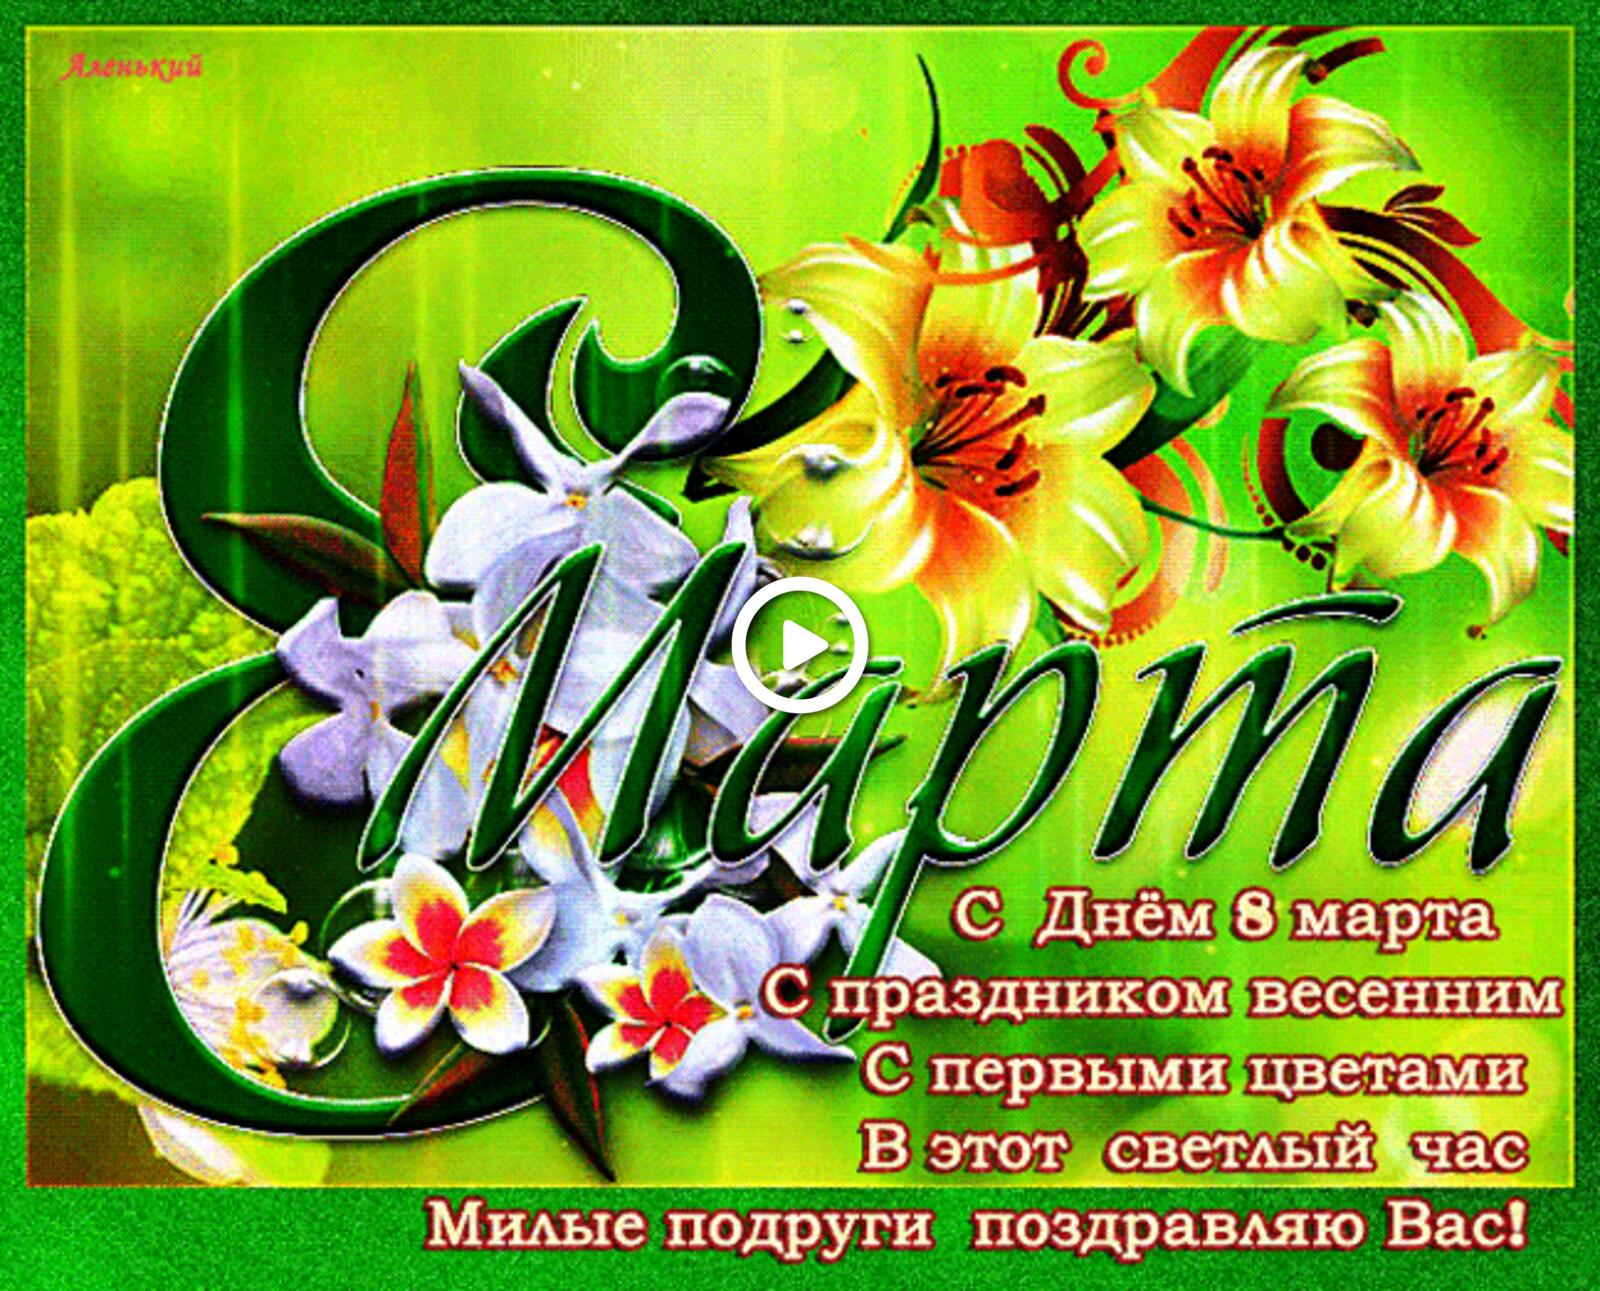 A postcard on the subject of flowers 8 march holiday for free